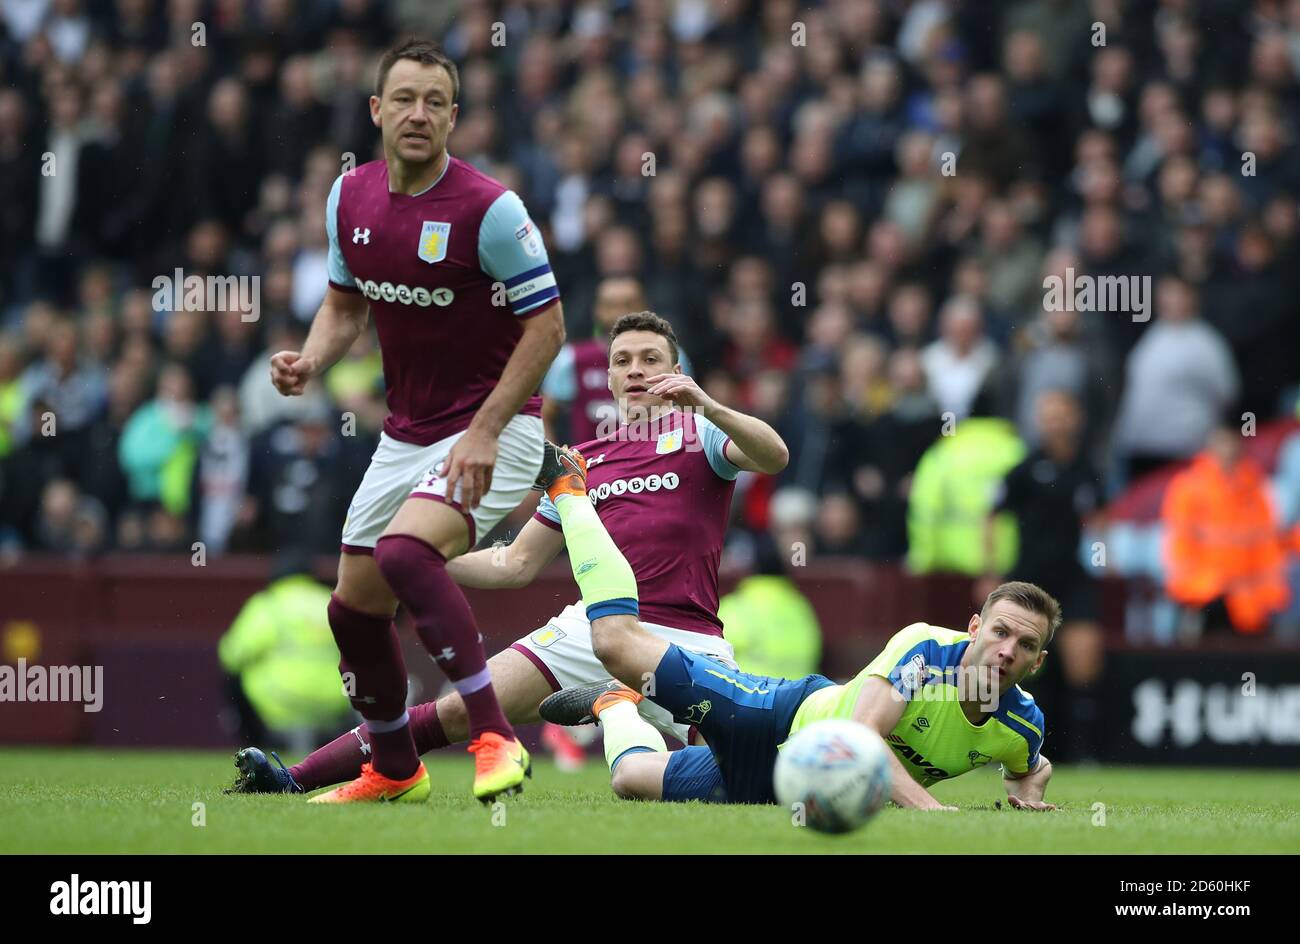 Derby County's Andreas Weimann wins battle for the ball against Aston Villa's John Terry and Aston Villa's James Chester  Stock Photo